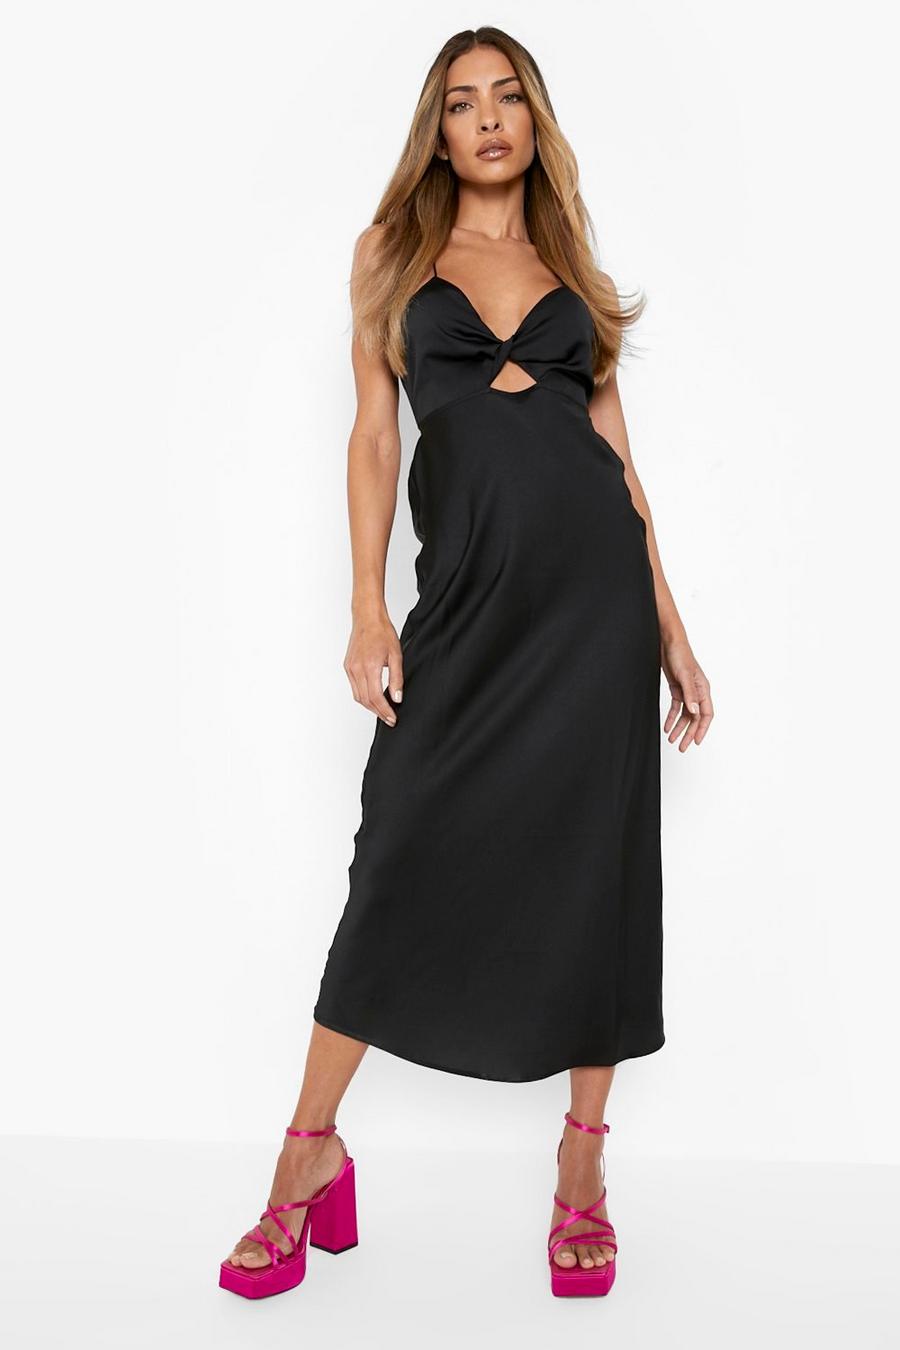 Black Satin Strappy Cut Out Midaxi Slip Dress image number 1